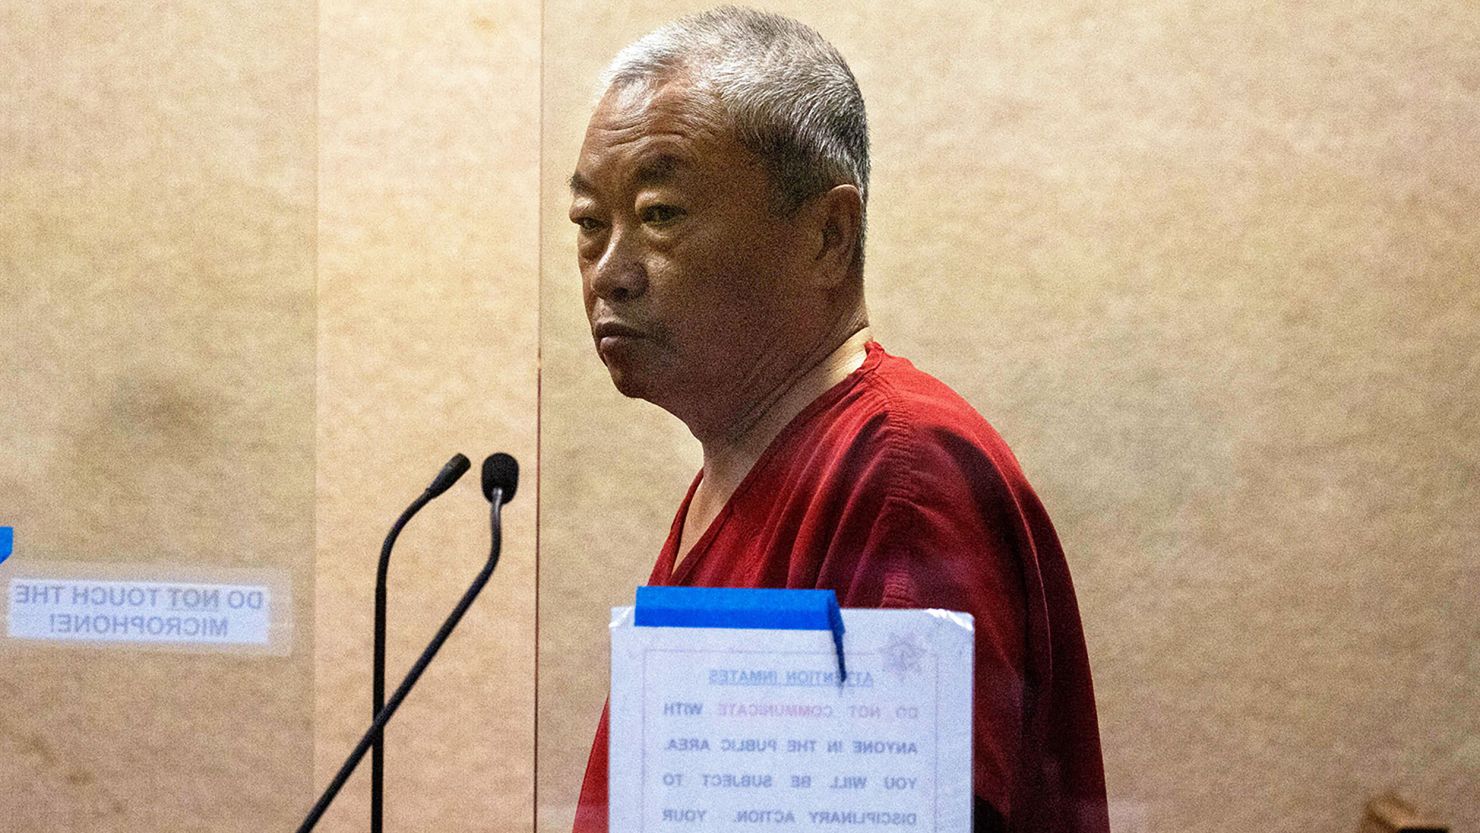 Chunli Zhao is accused of shooting four people at a mushroom farm in Half Moon Bay where he worked and killing three more at a nearby farm, authorities said.